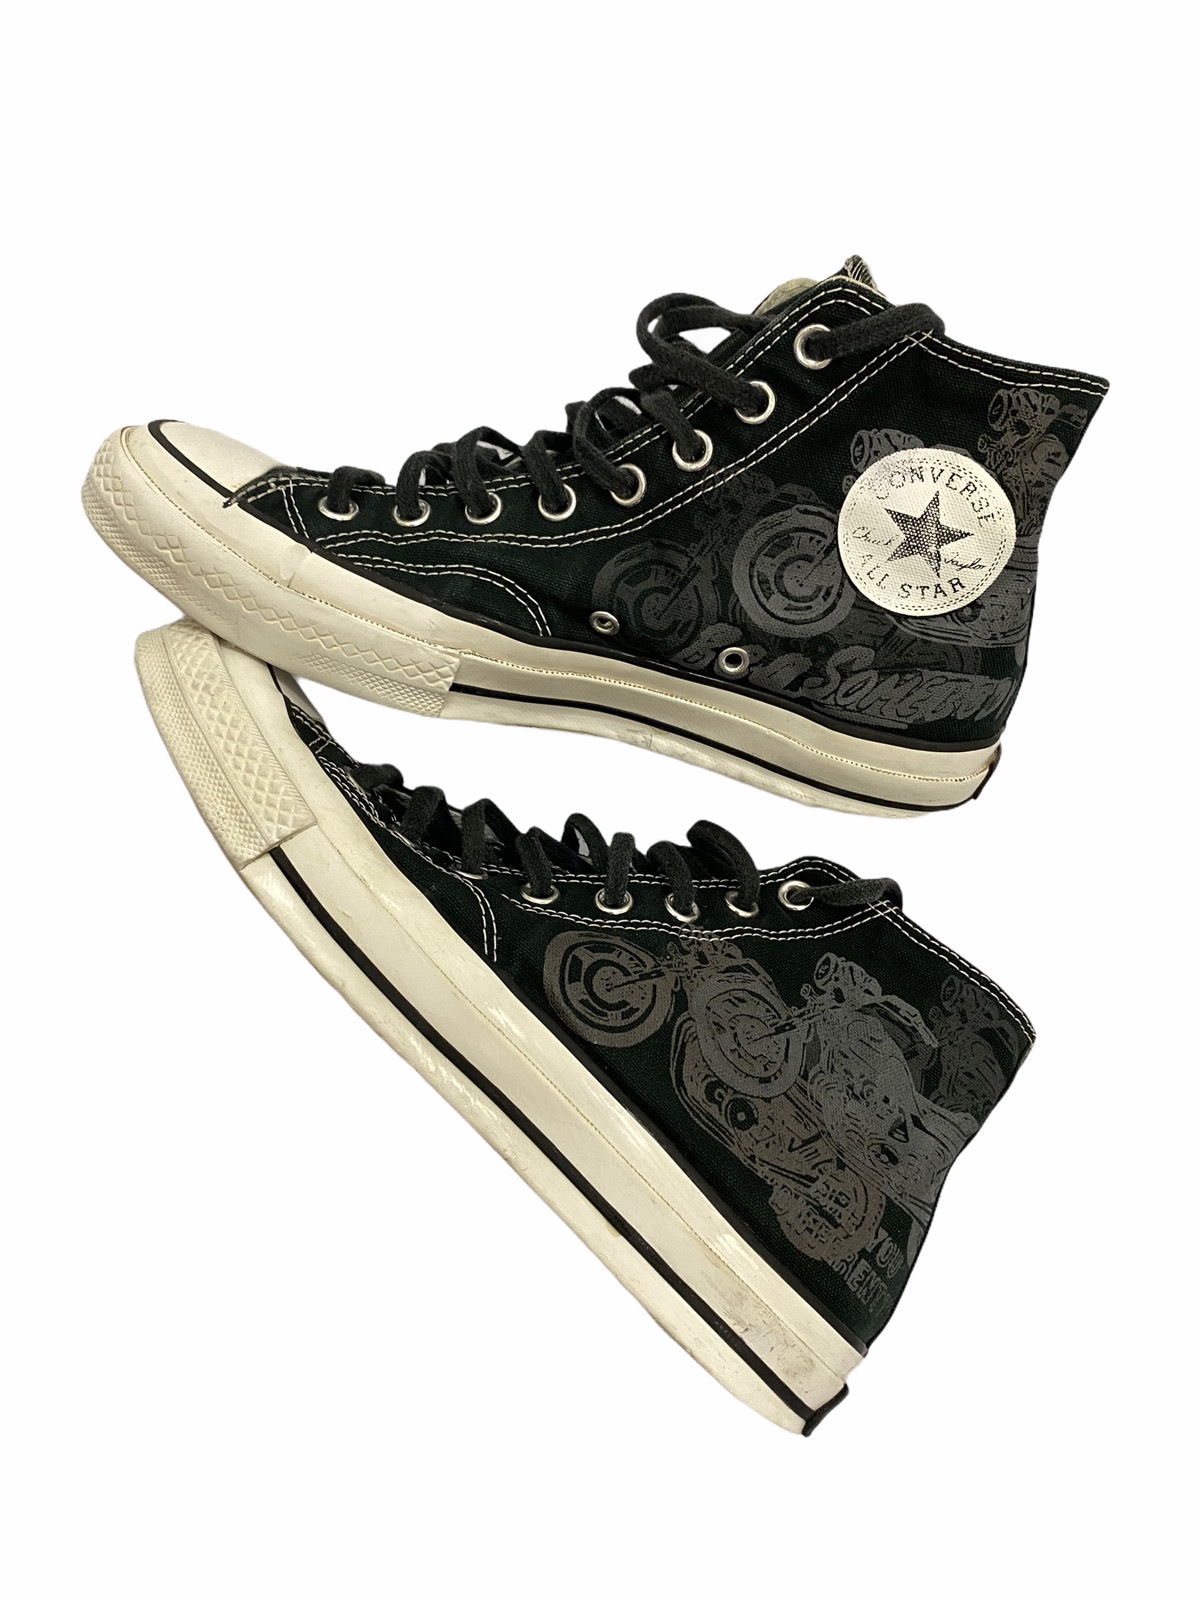 Converse All Star Andy Warhol High Sneaker - 1